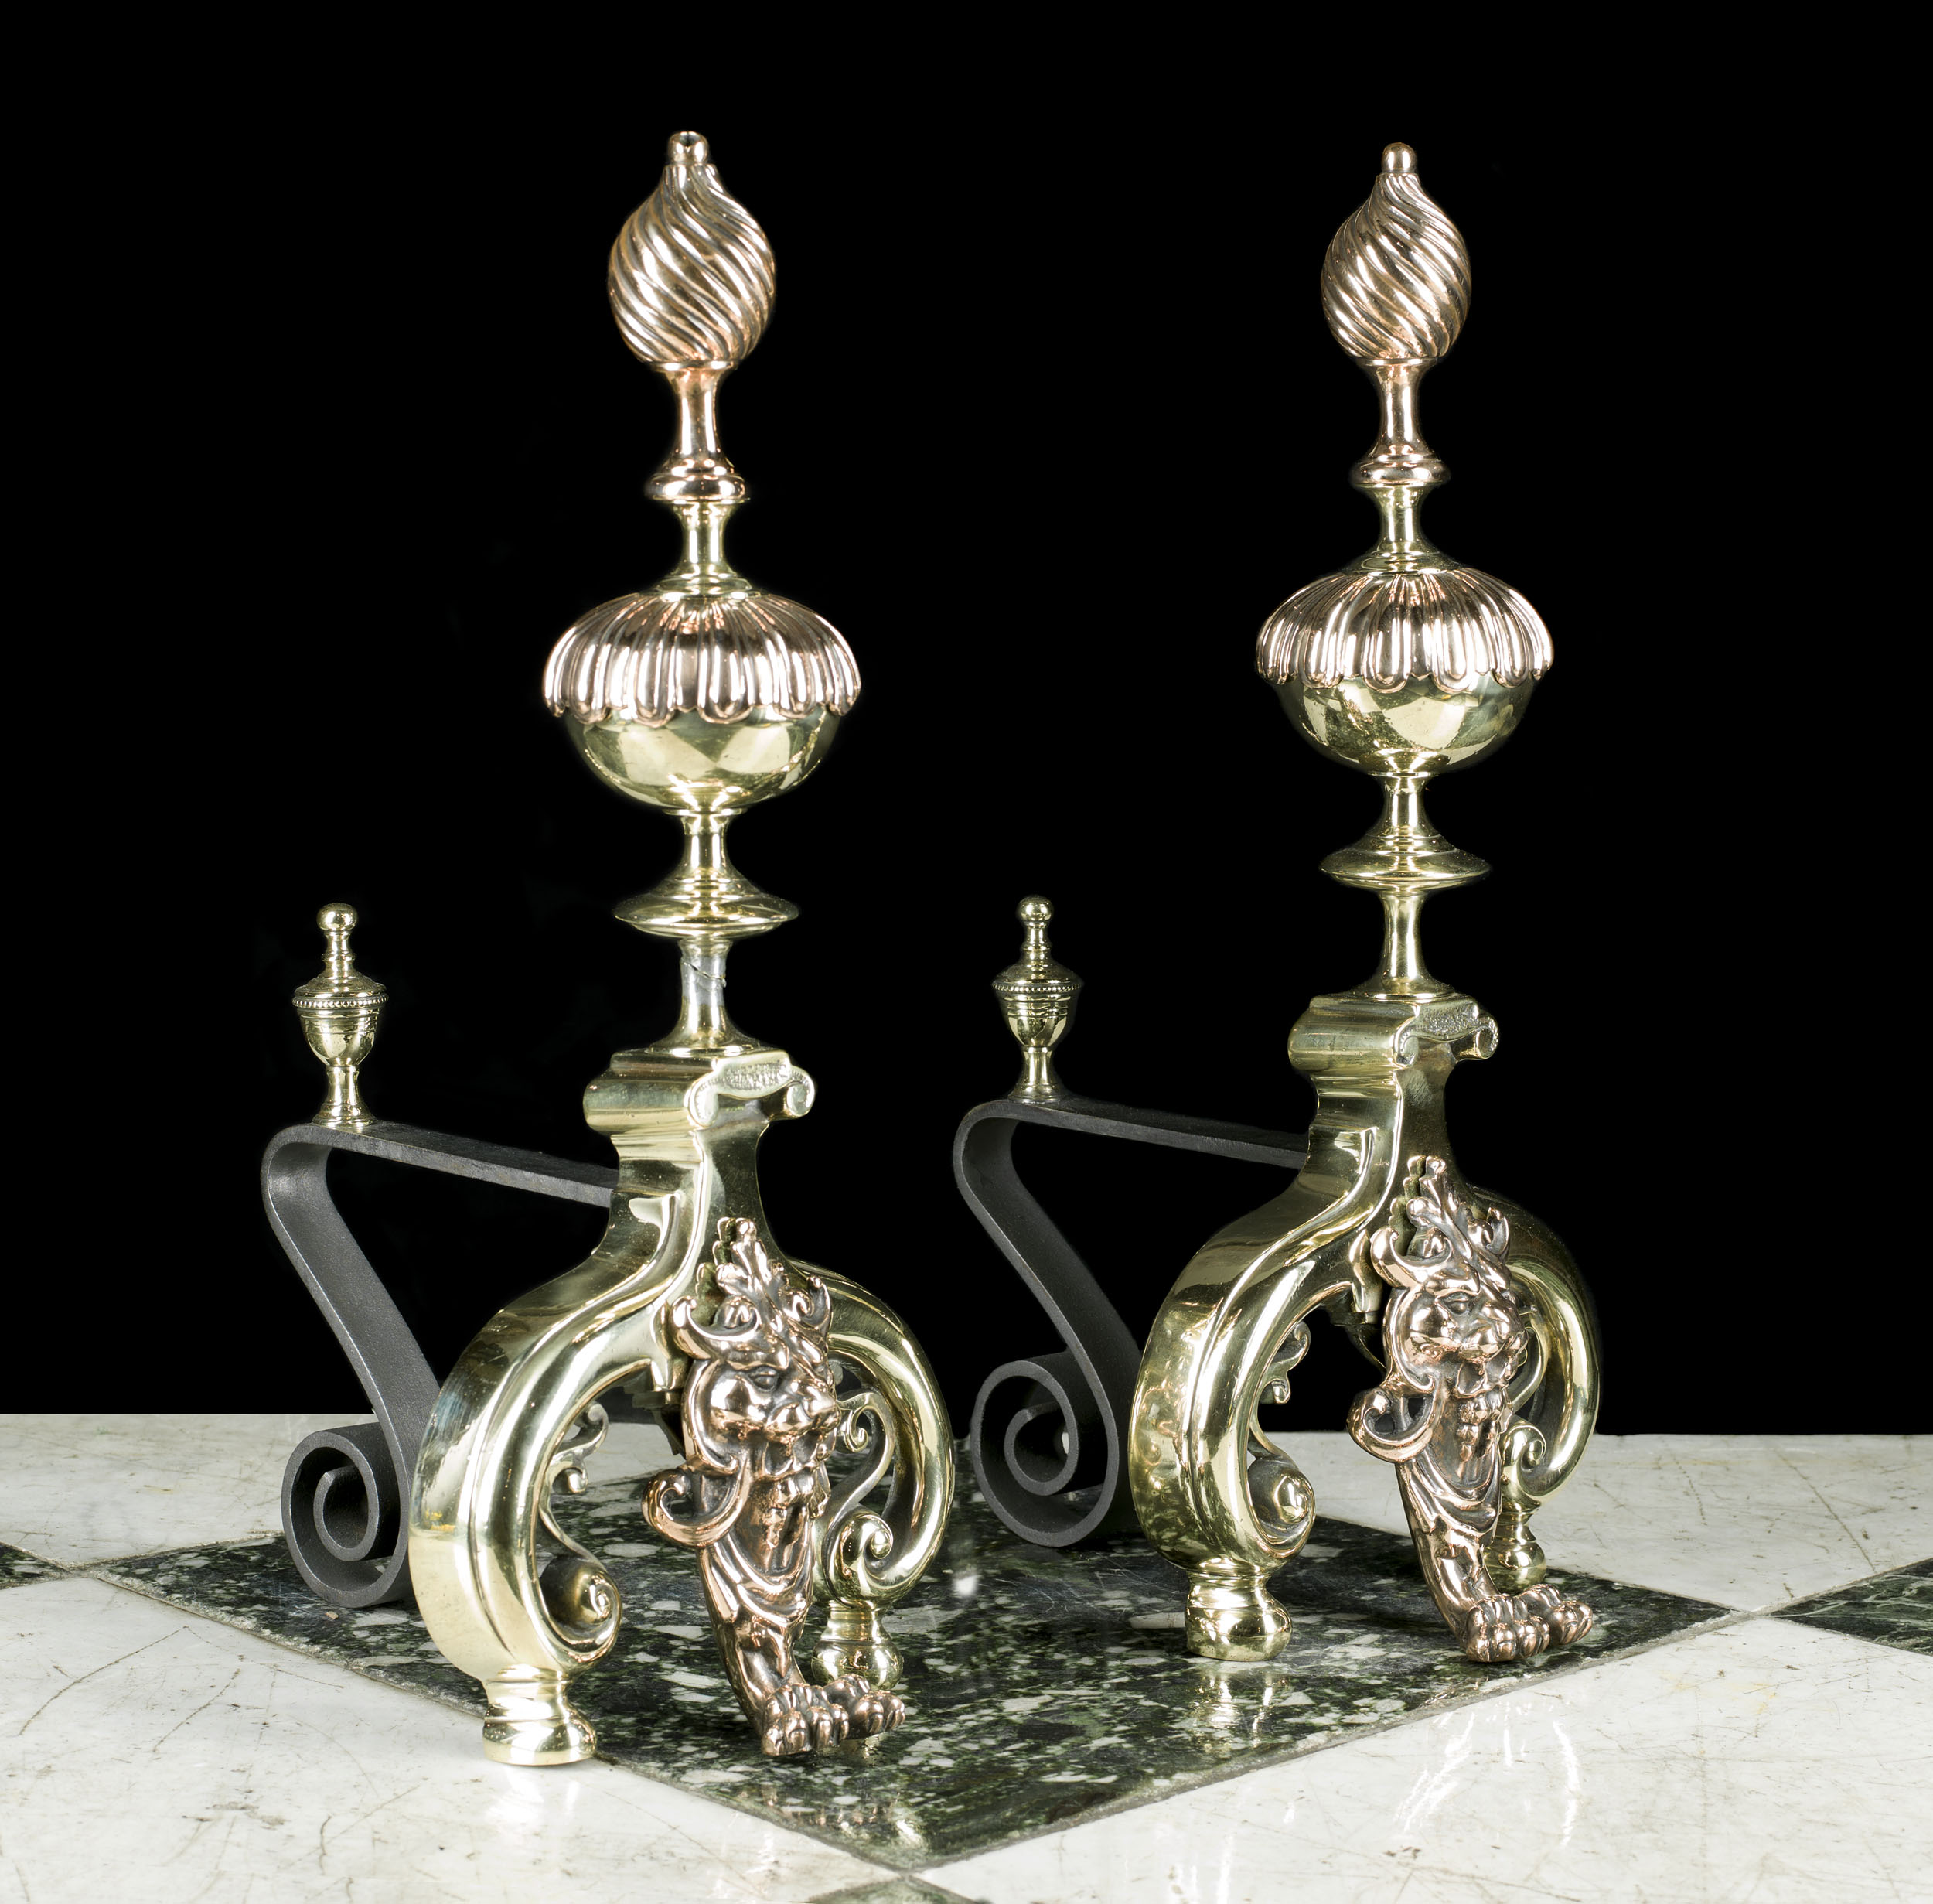 Antique Pair of Baroque Style Fire Dogs